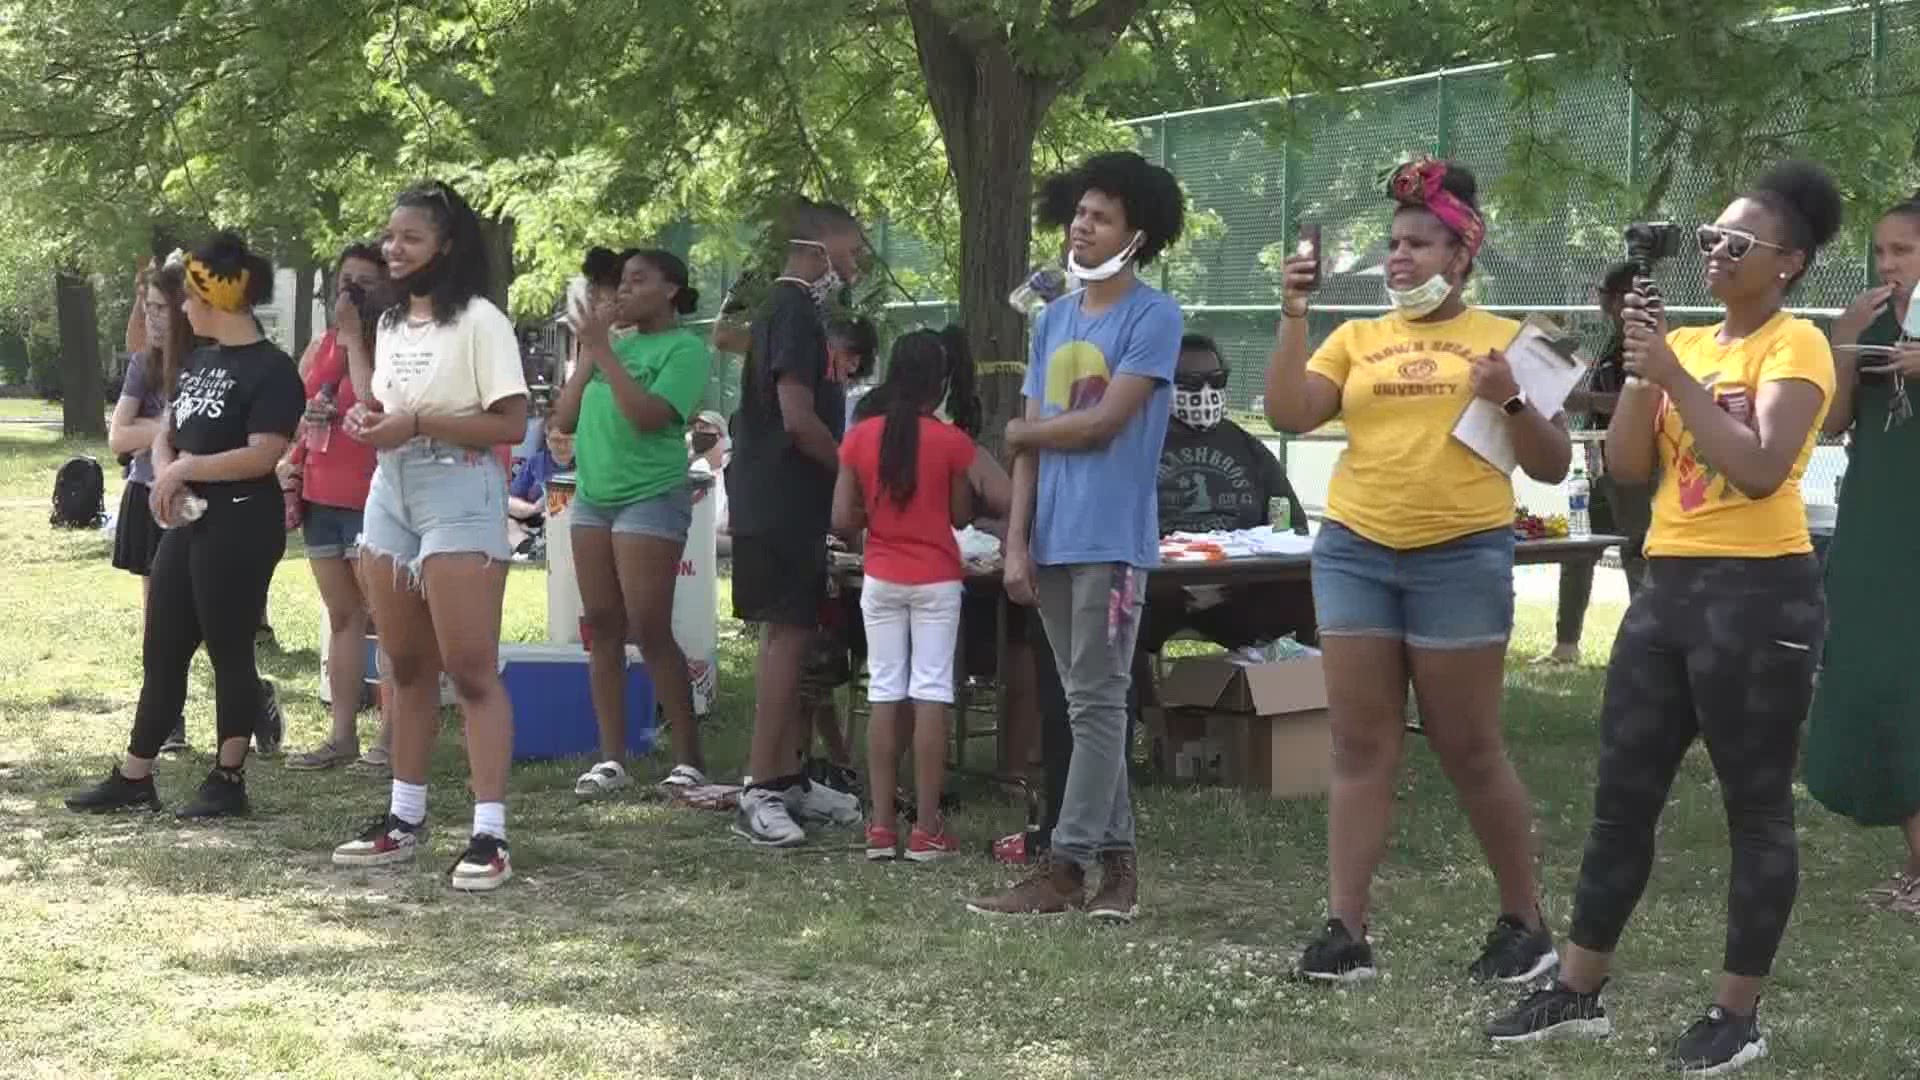 Vendors, activities and spoken word were just a few things you could find at the celebration at MLK Park Friday afternoon.